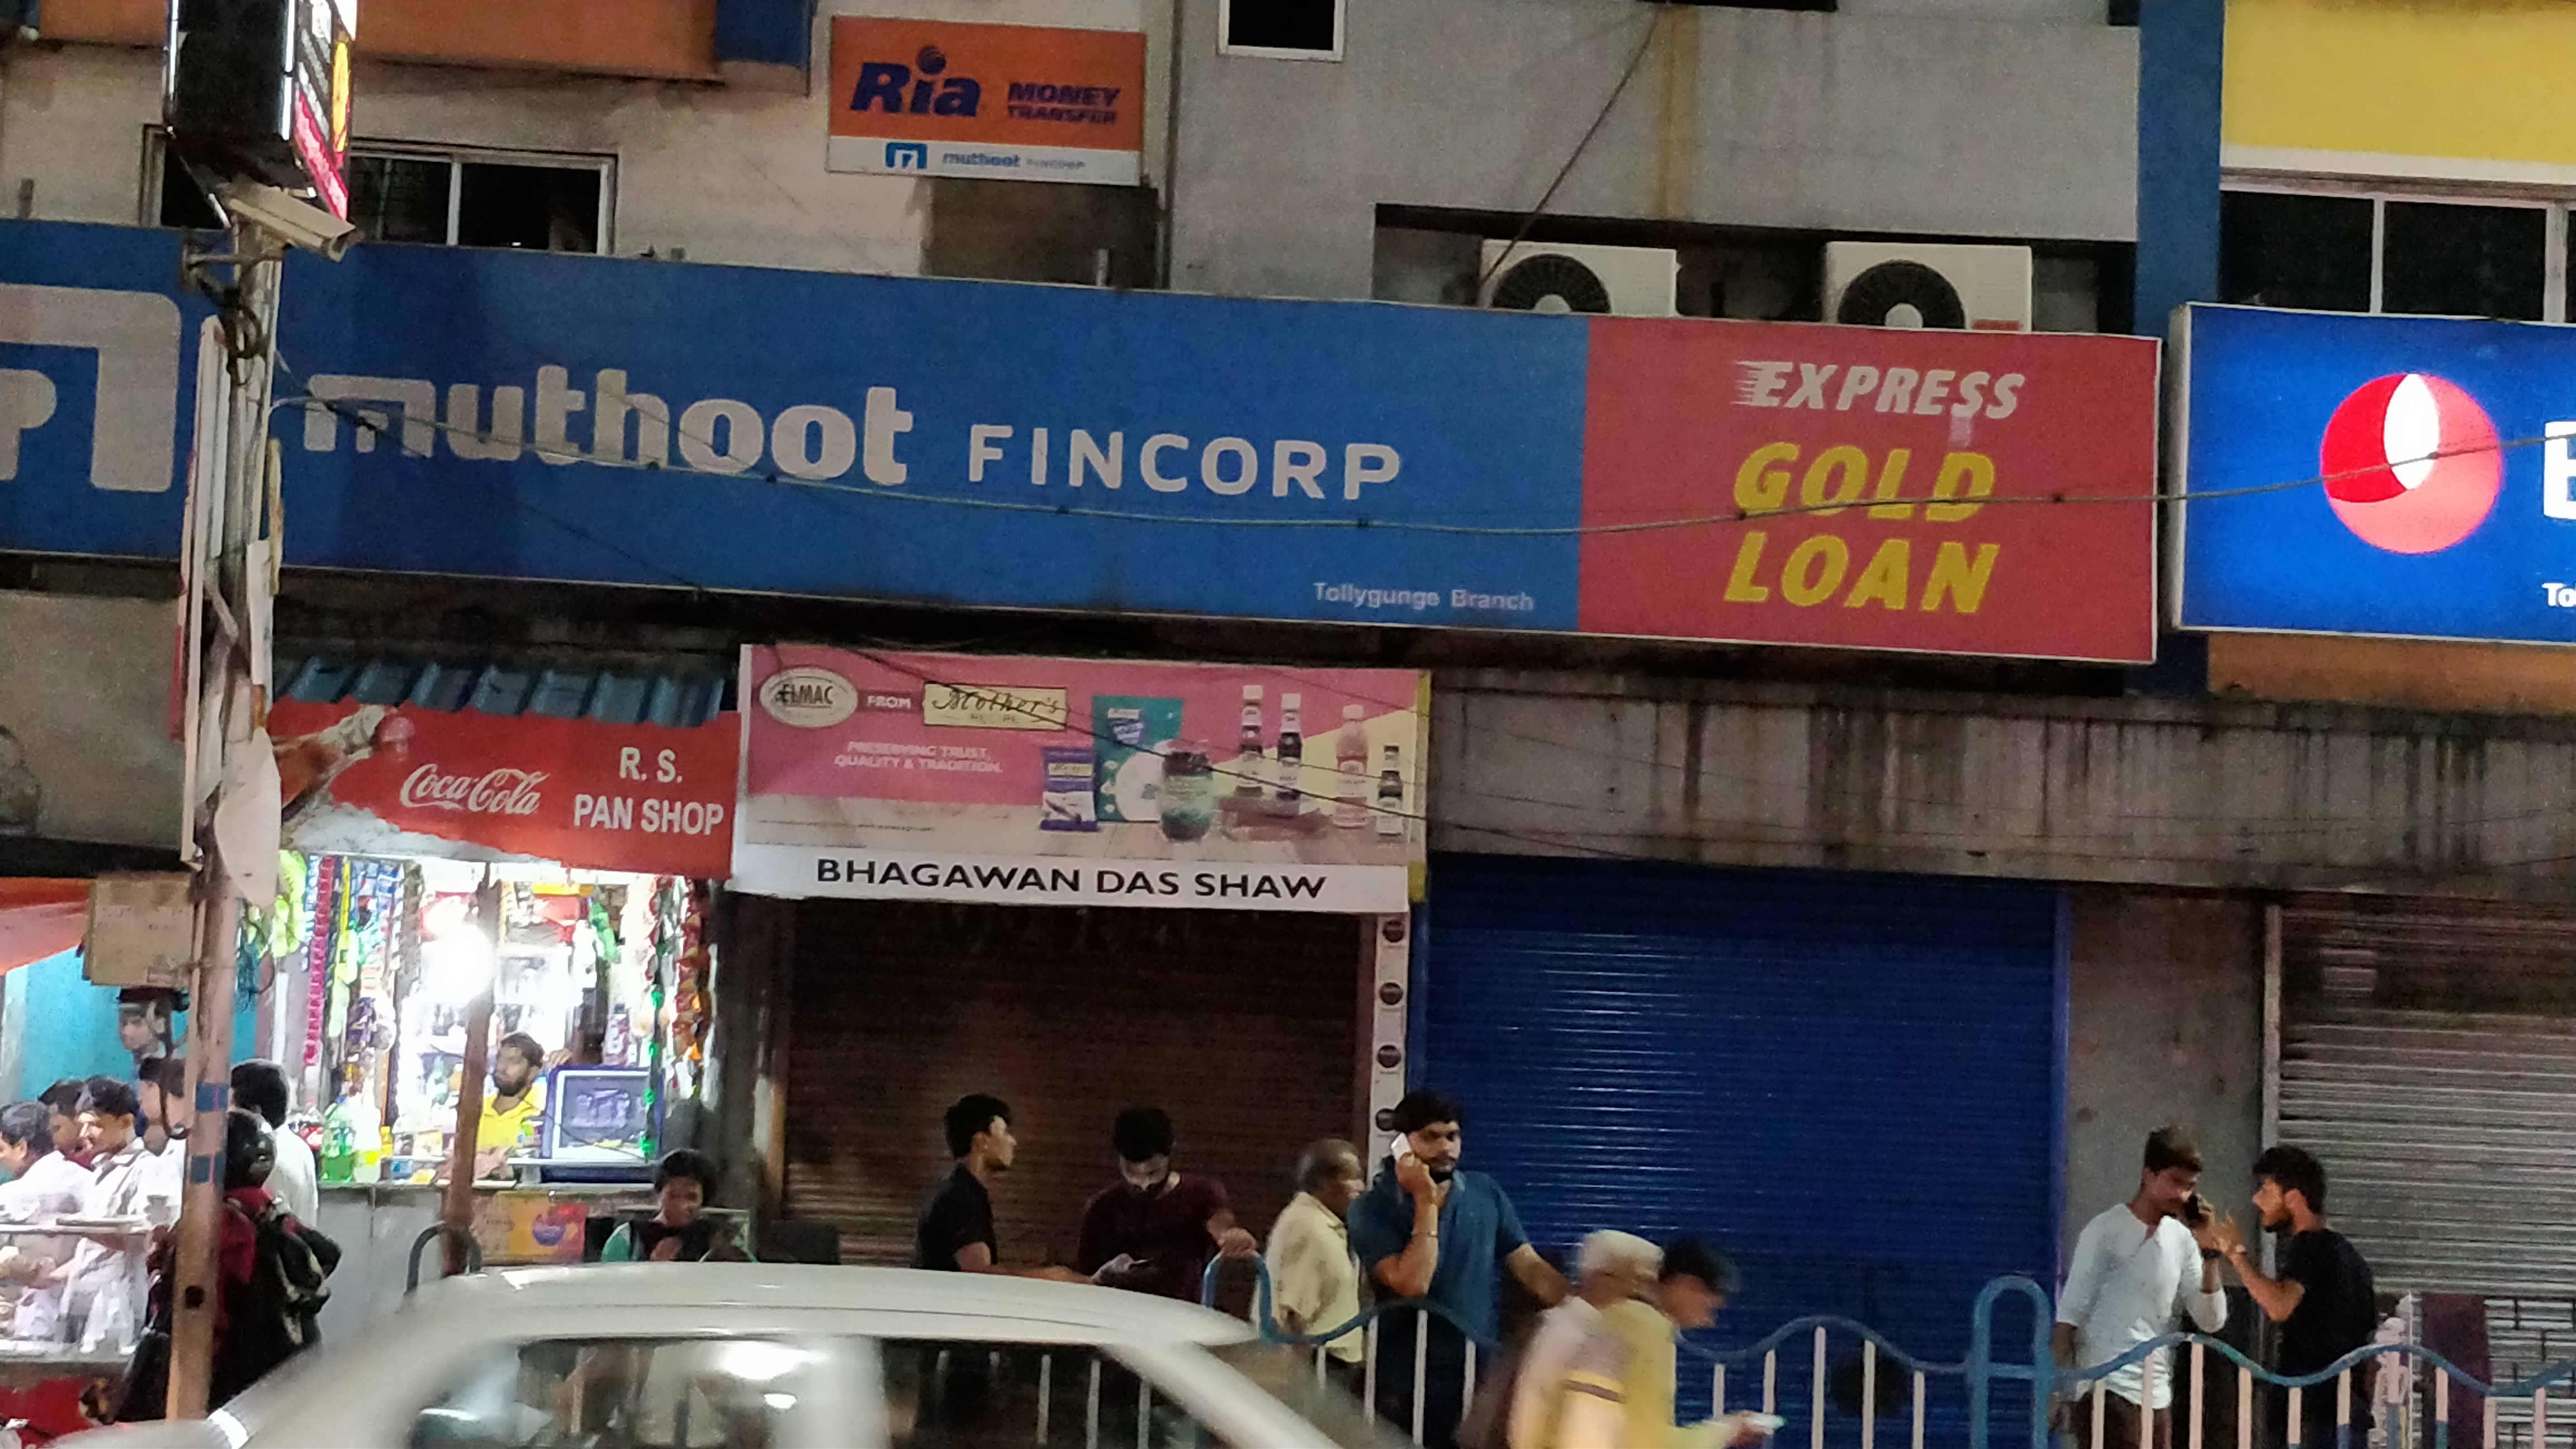 Muthoot Fincorp Gold Loan Services in Tollygunge, Kolkata, West Bengal